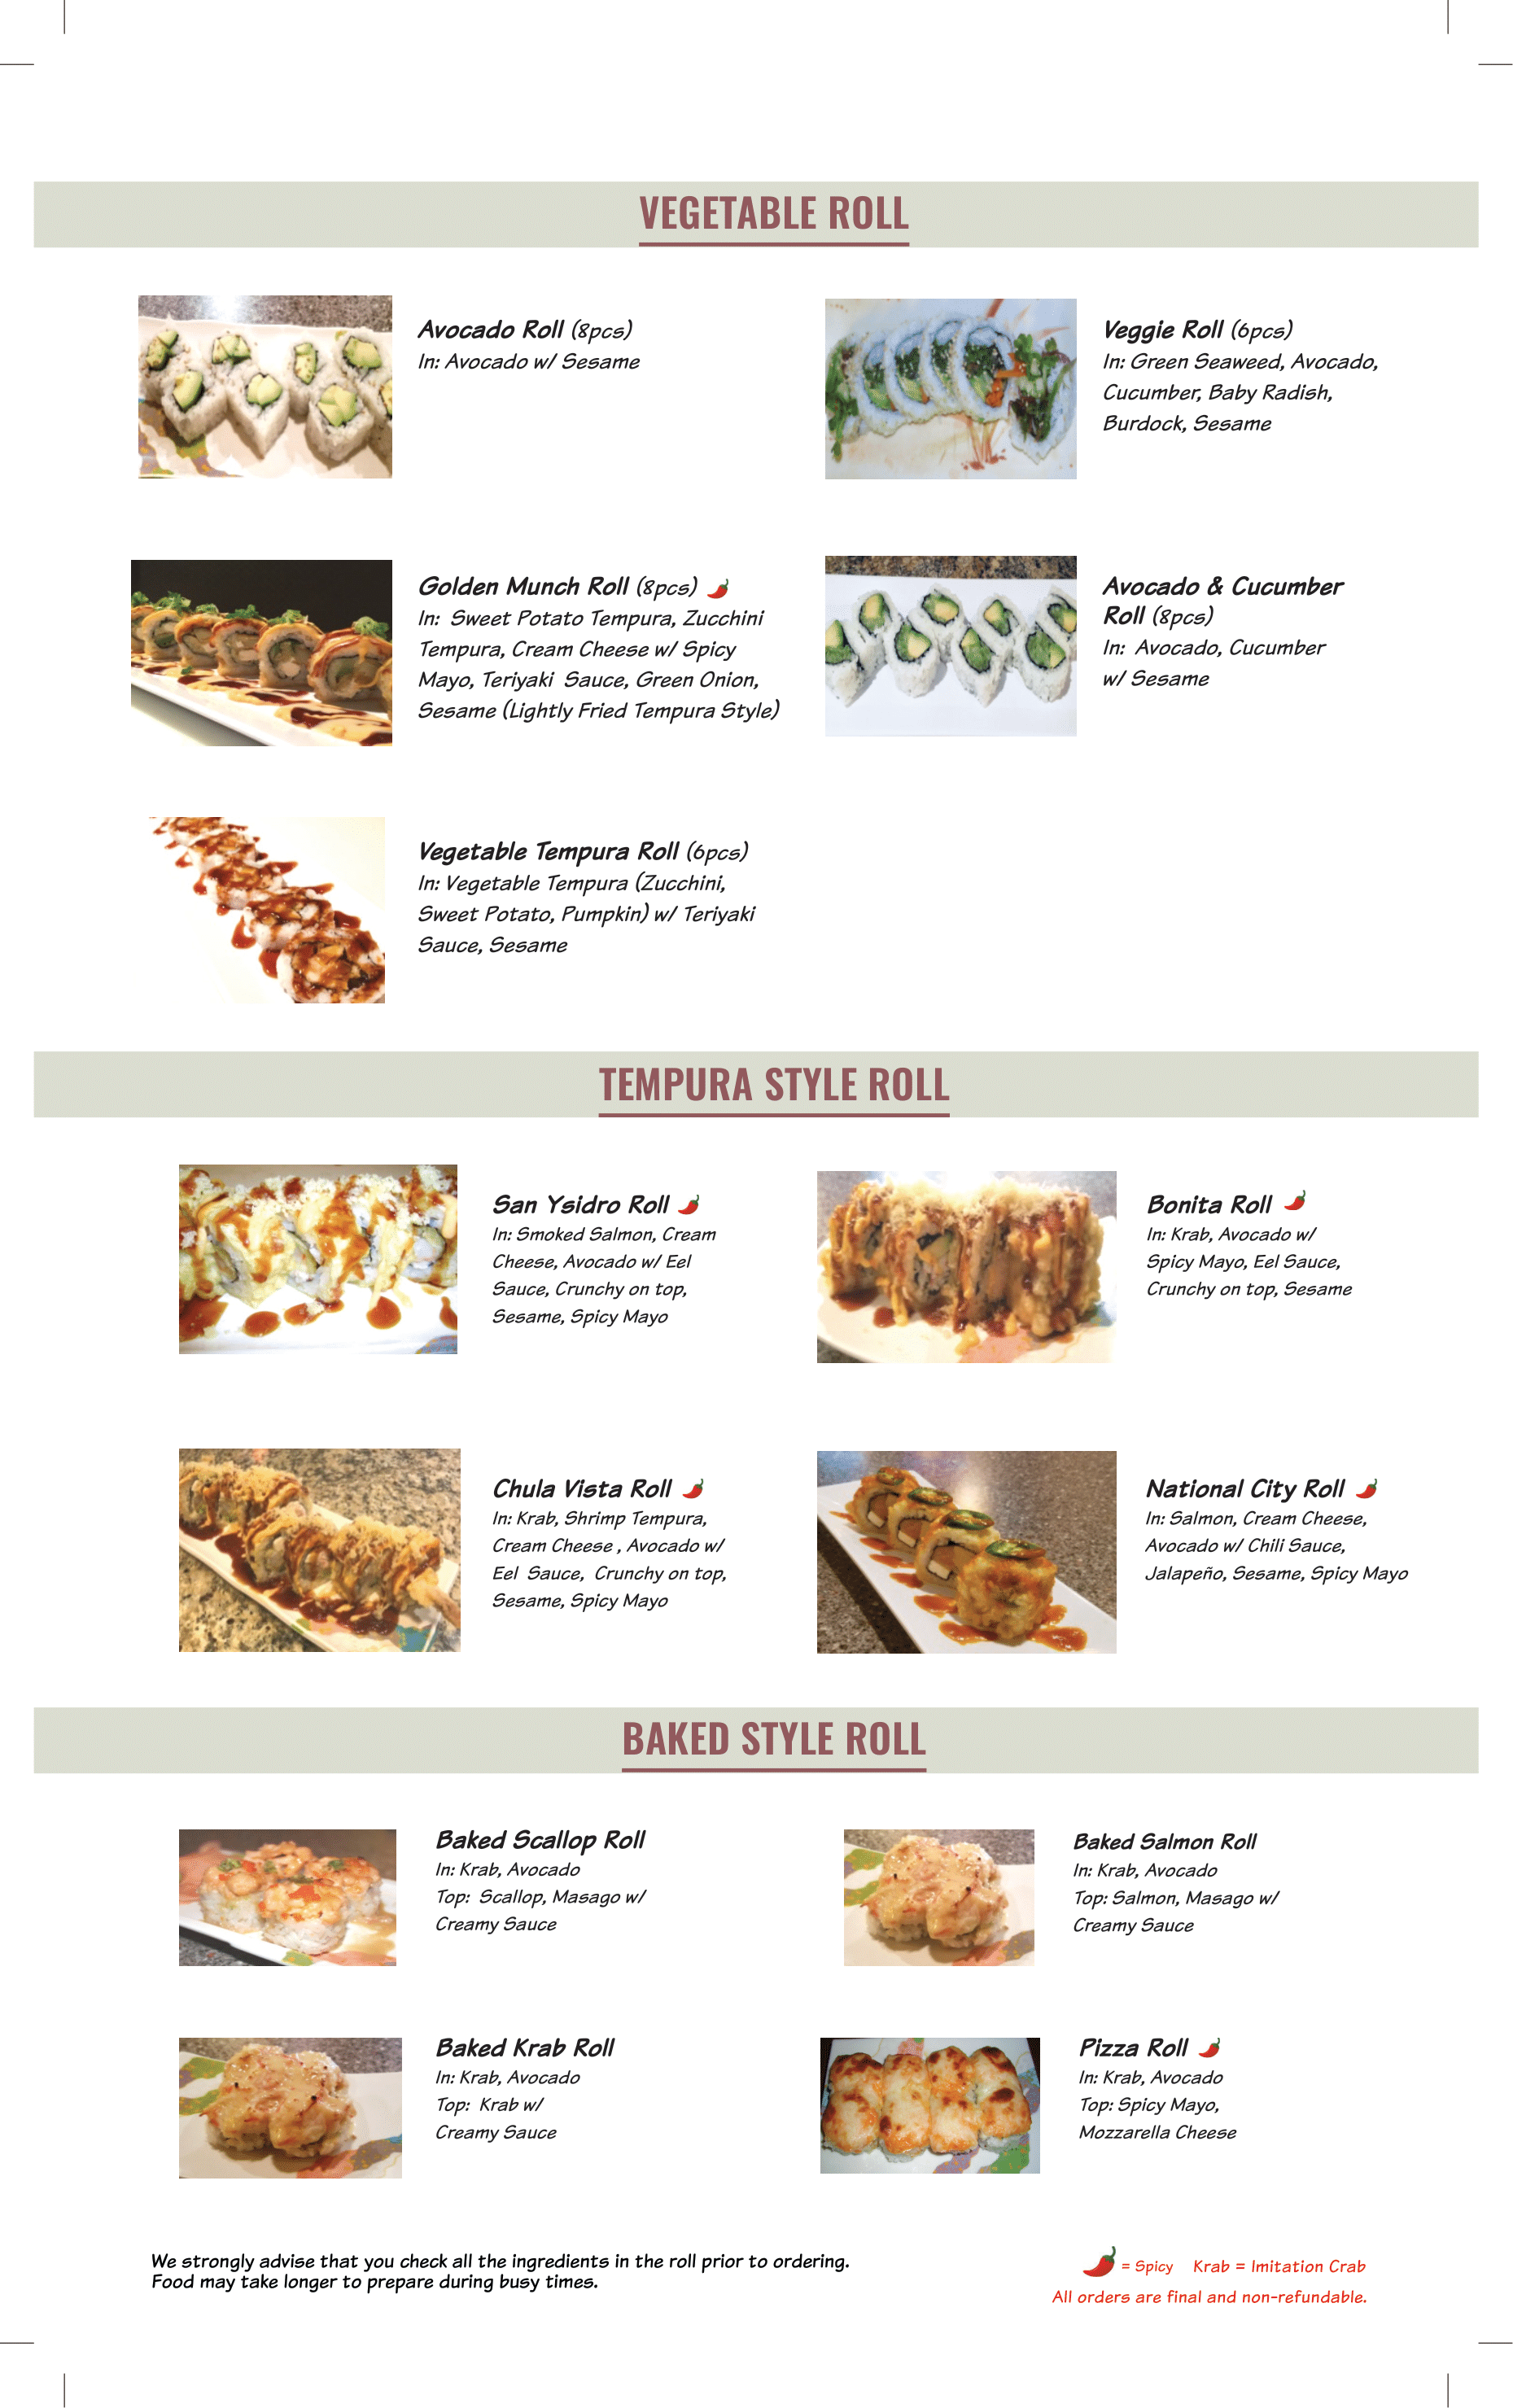 vegetable roll, tempura style roll, baked style roll